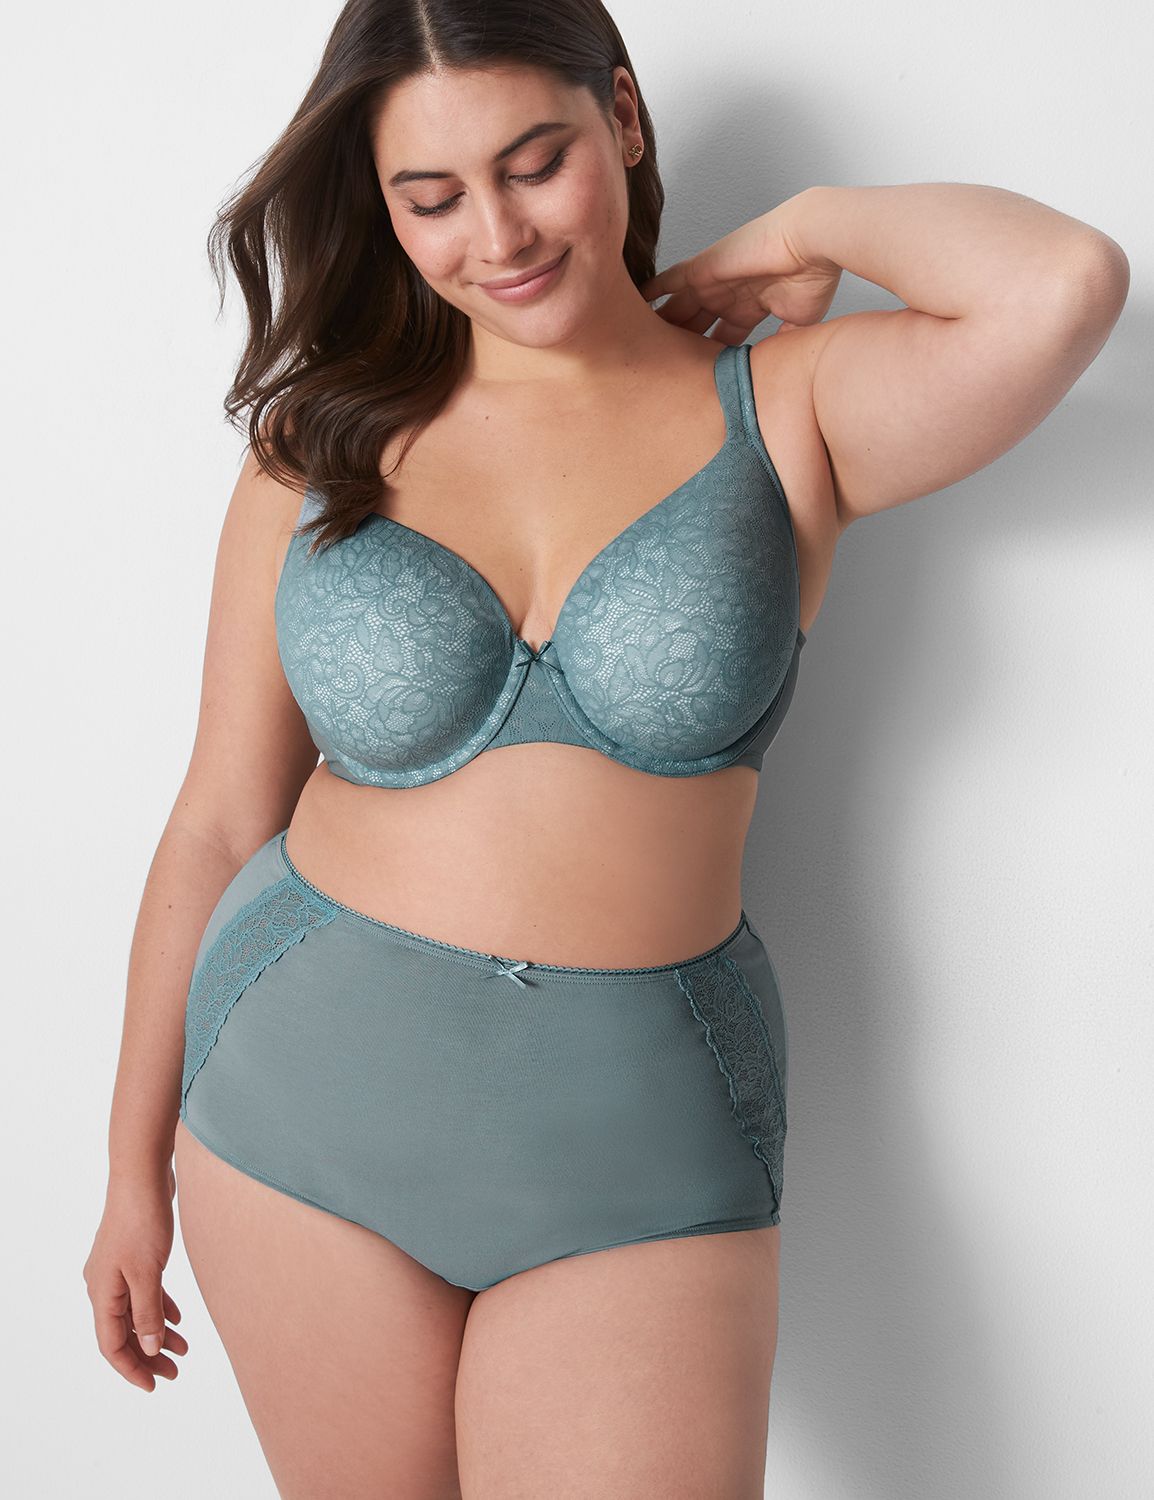 Cotton Lightly Lined Full Coverage Bra